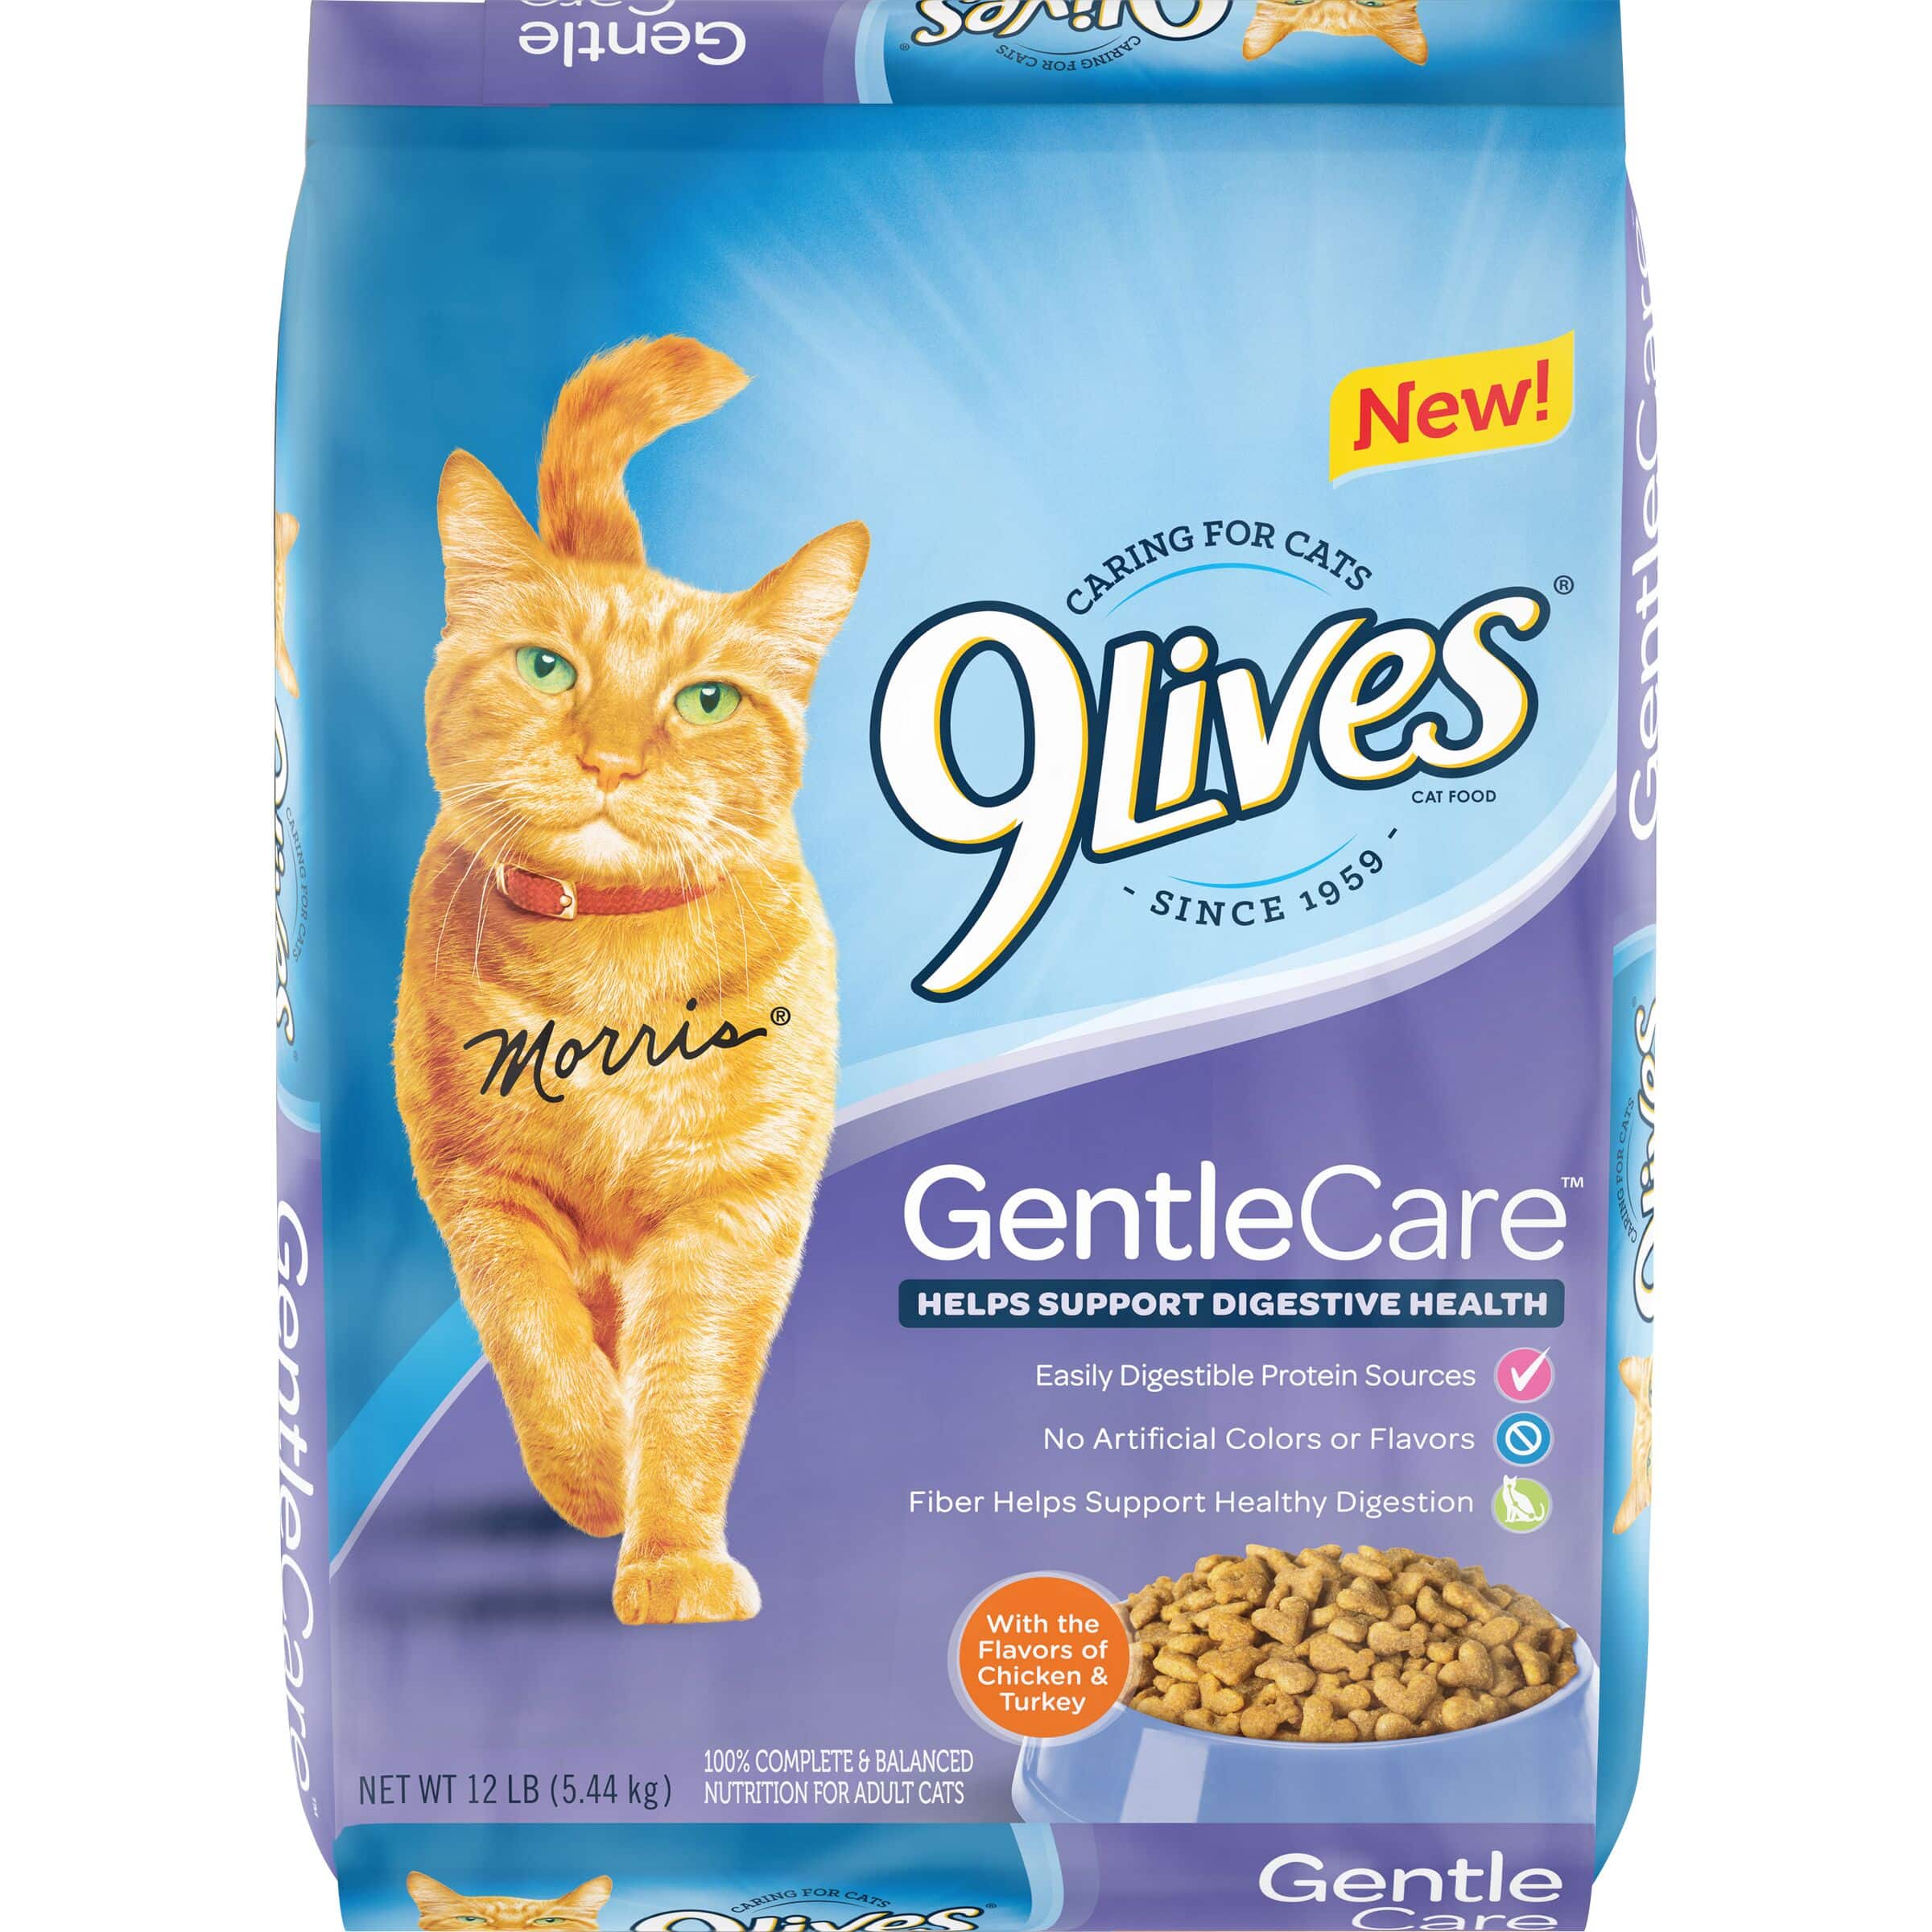 9Lives Gentle Care Dry Cat Food with Chicken and Turkey Flavors, 12lb ...